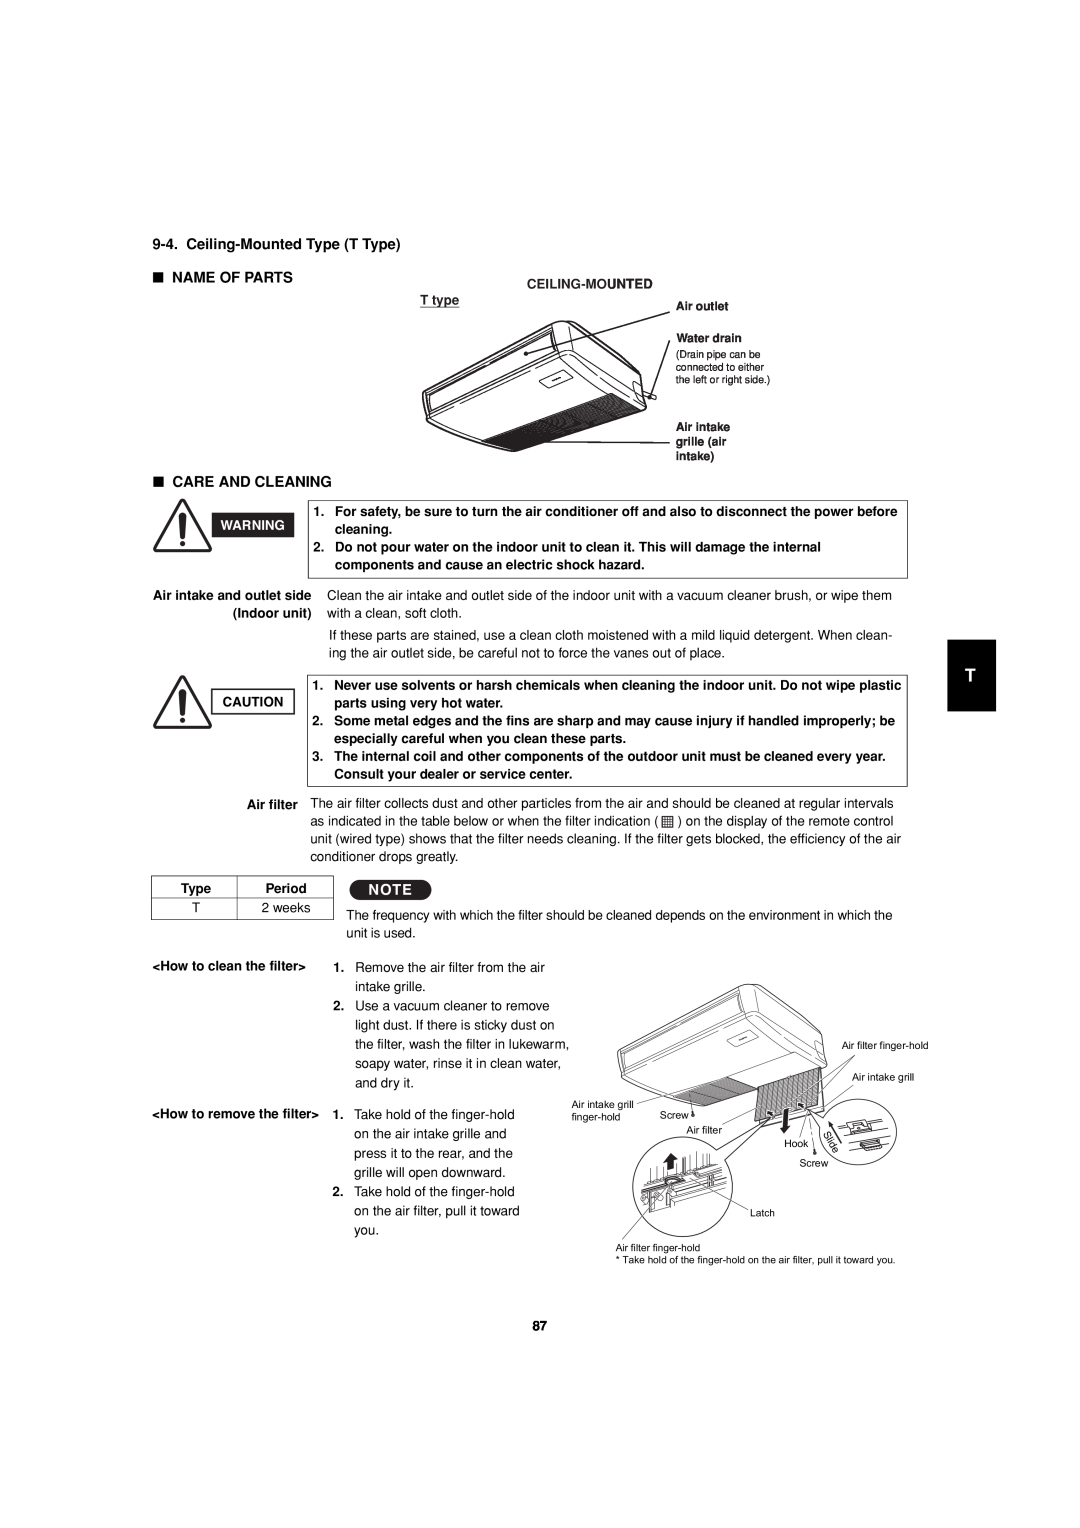 Sanyo 85464359981002 installation instructions Ceiling-MountedType T Type, Name Of Parts, Care And Cleaning 